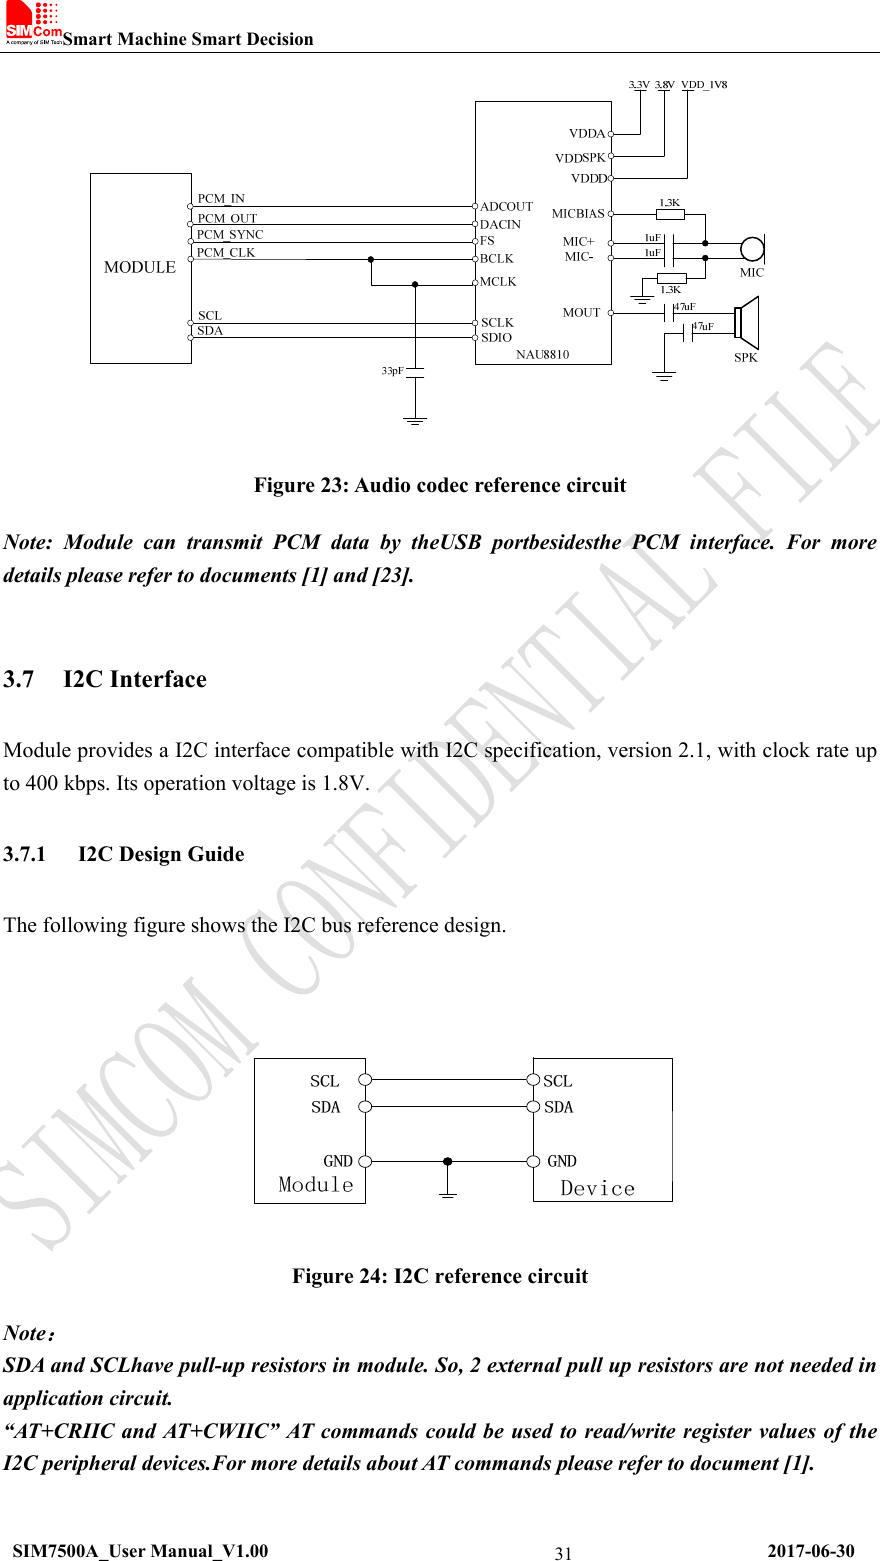 Smart Machine Smart Decision   SIM7500A_User Manual_V1.00                                                      2017-06-30 31 Figure 23: Audio codec reference circuit Note: Module can transmit PCM data by theUSB portbesidesthe PCM interface. For more details please refer to documents [1] and [23].  3.7 I2C Interface Module provides a I2C interface compatible with I2C specification, version 2.1, with clock rate up to 400 kbps. Its operation voltage is 1.8V. 3.7.1 I2C Design Guide The following figure shows the I2C bus reference design.  Figure 24: I2C reference circuit Note： SDA and SCLhave pull-up resistors in module. So, 2 external pull up resistors are not needed in application circuit.   “AT+CRIIC and AT+CWIIC” AT commands could be used to read/write register values of the I2C peripheral devices.For more details about AT commands please refer to document [1]. 